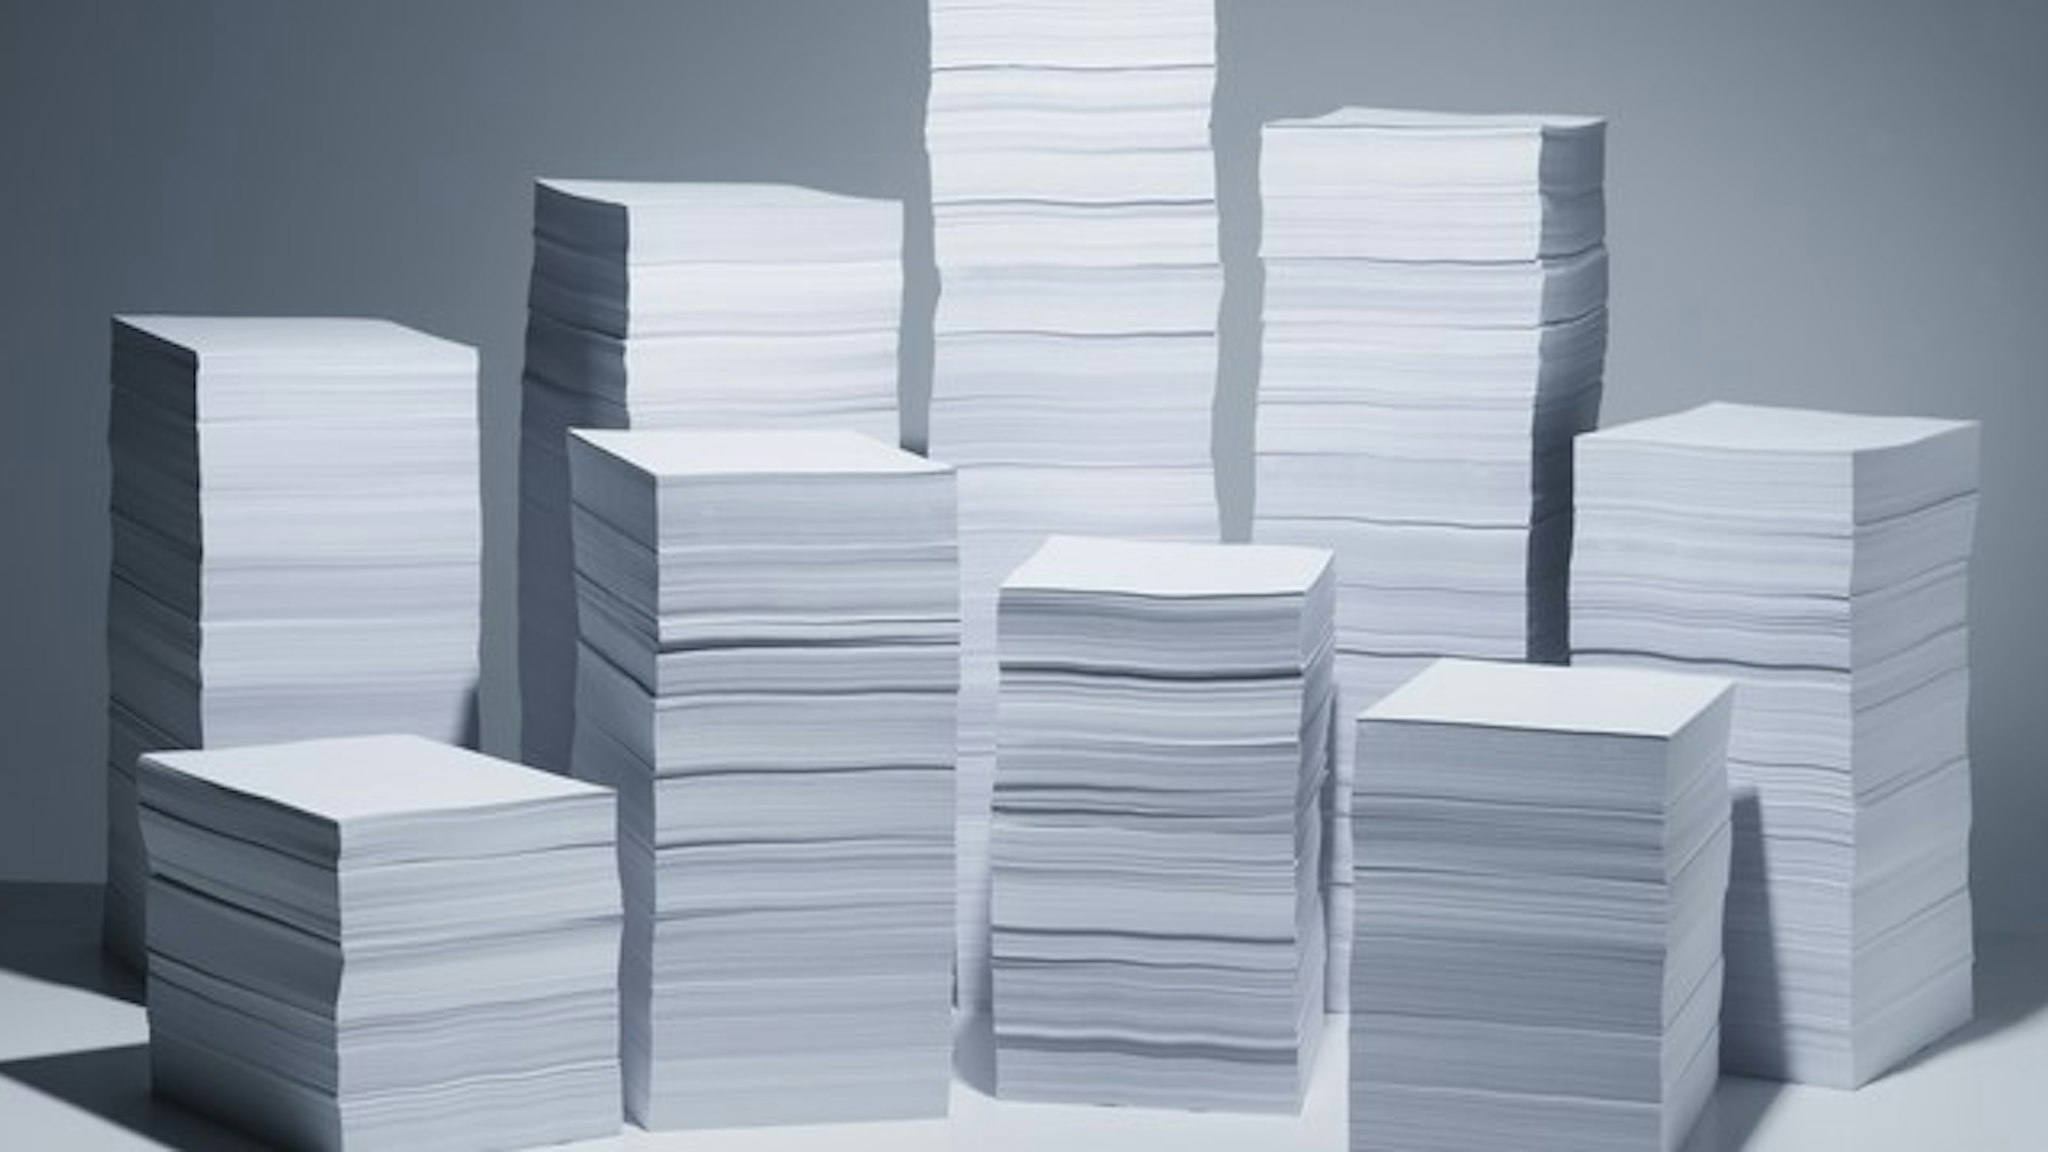 45,000 sheets of paper stacked into nine piles